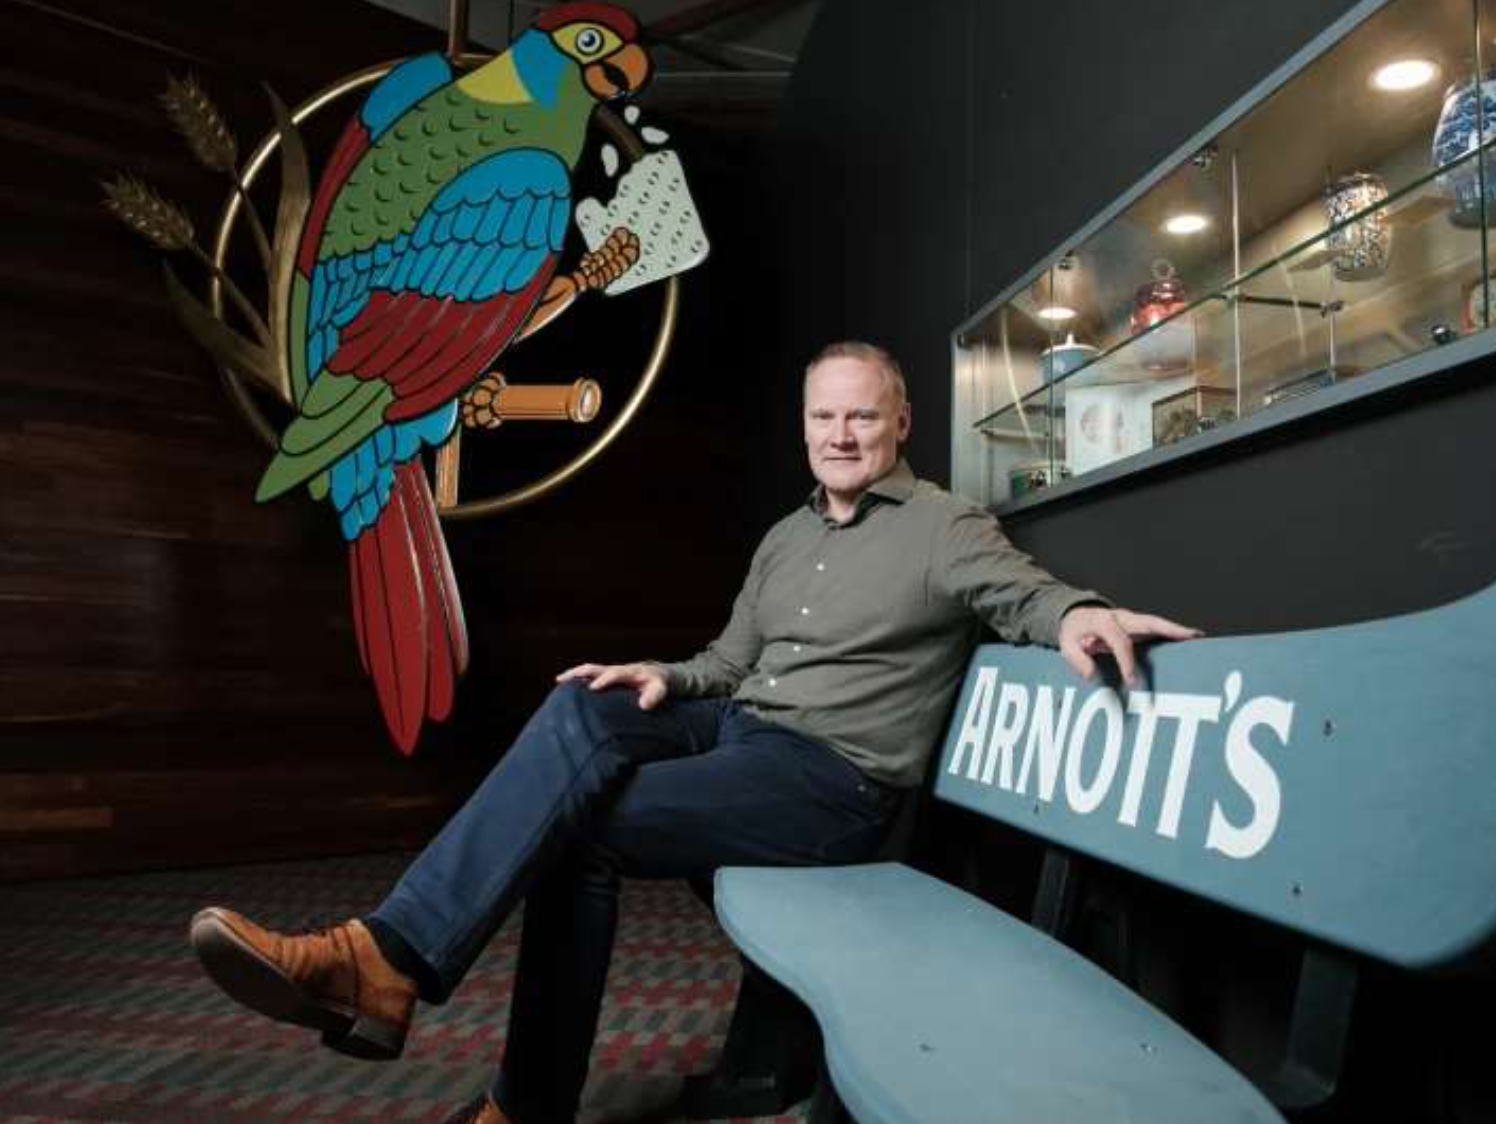 Simon Lowden sitting on a blue wooden bench with the word Arnotts painted in white. Next to Simon is a mobile with the macaw bird from the Arnotts logo.